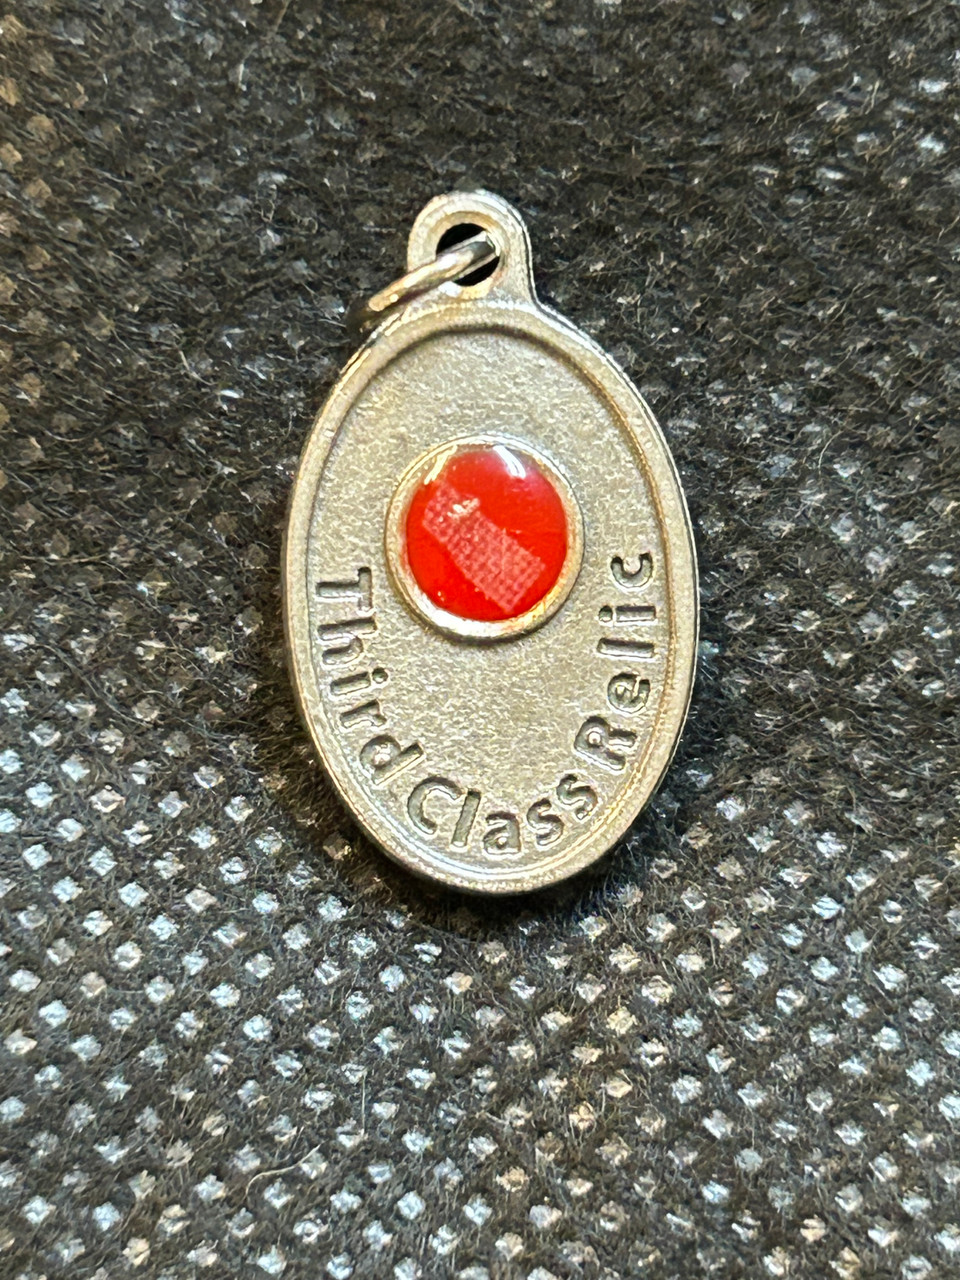 Saint Therese of Lisieux third class relic medal